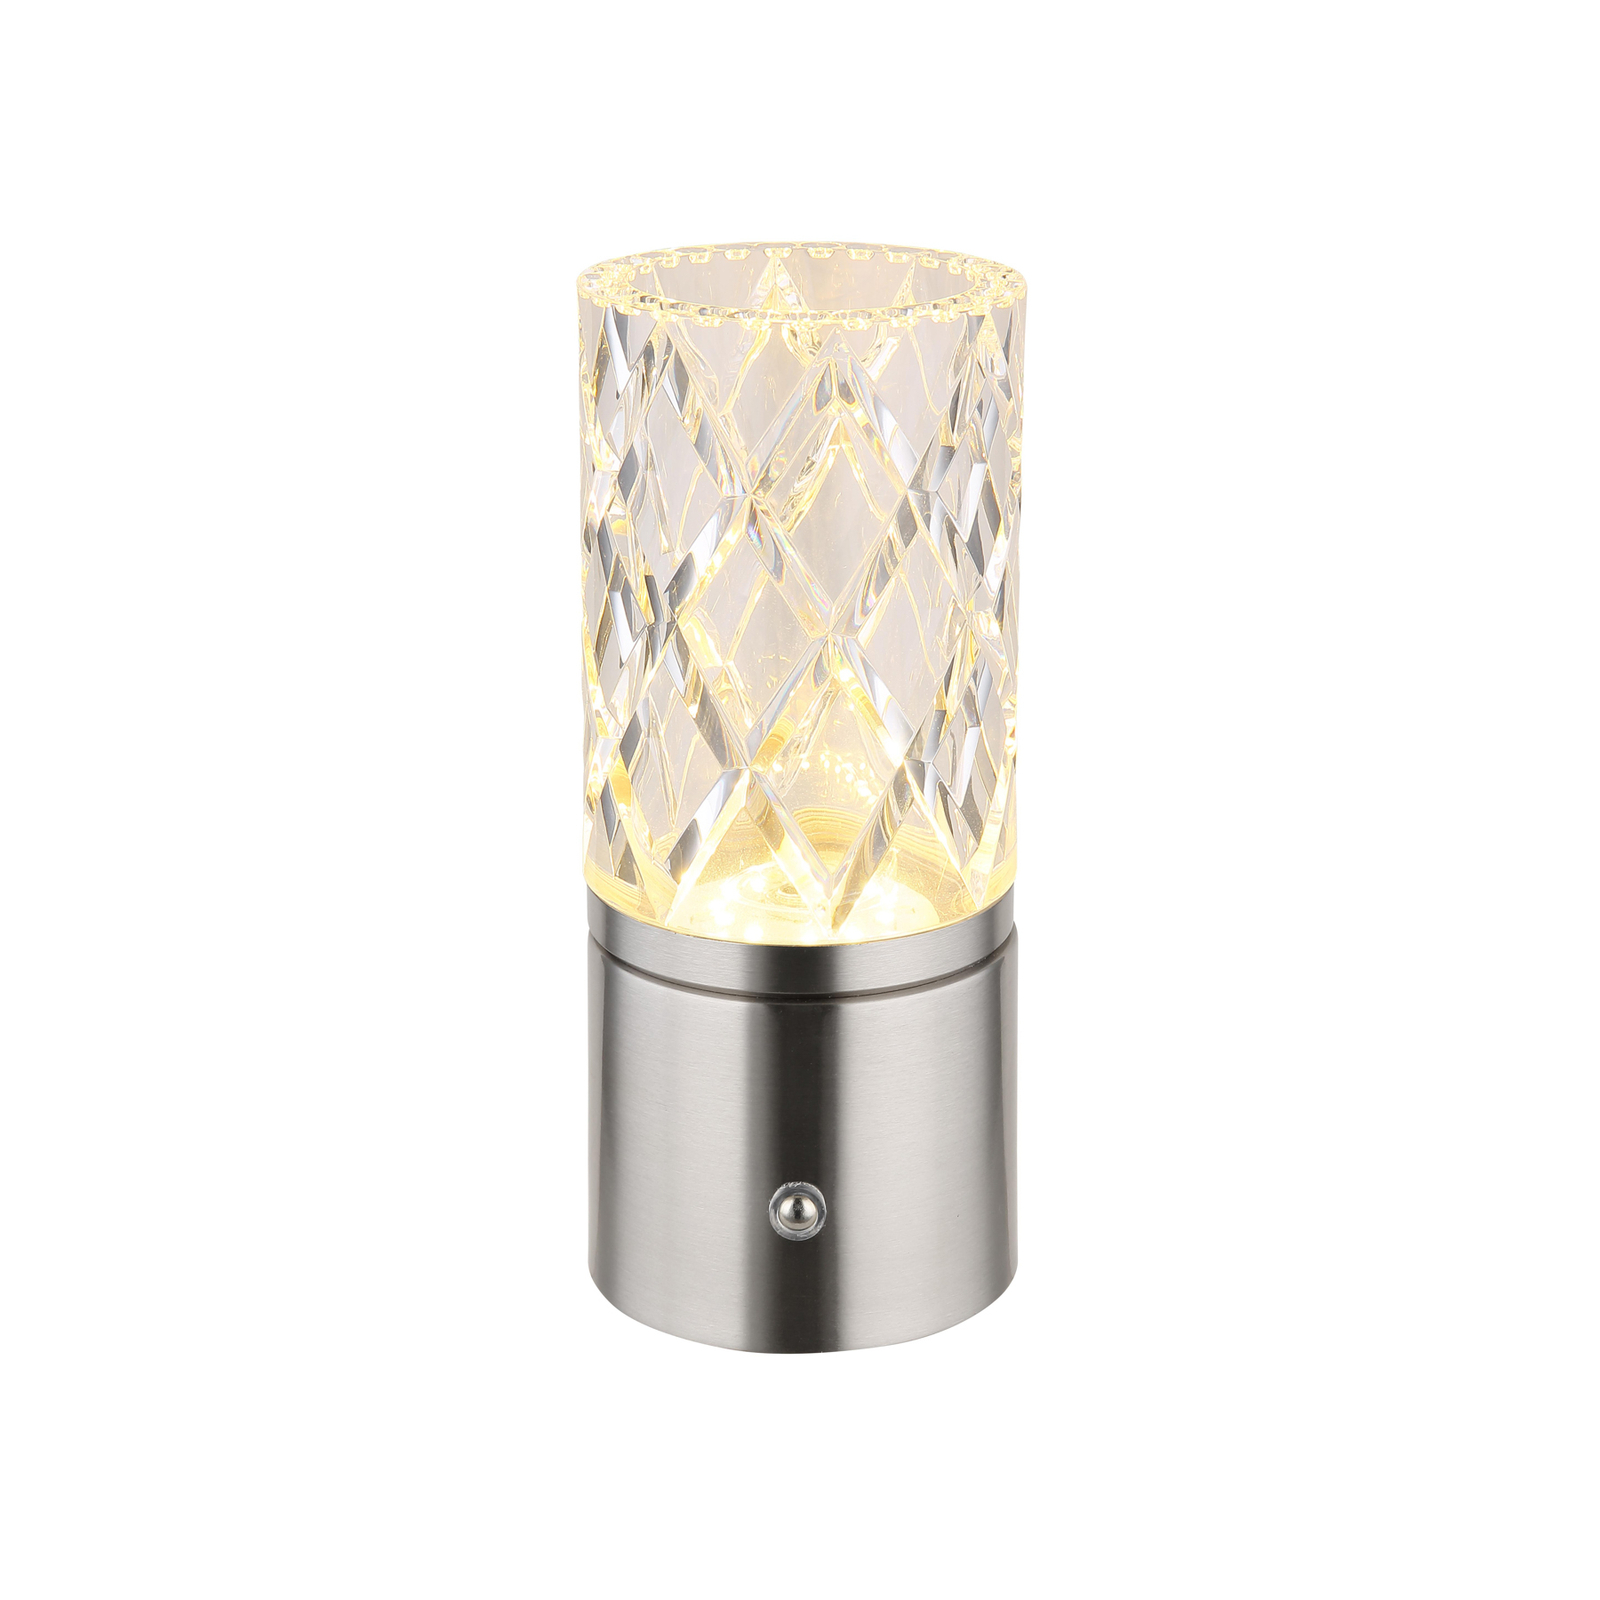 LED table lamp Lunki, nickel-coloured, height 19 cm, CCT